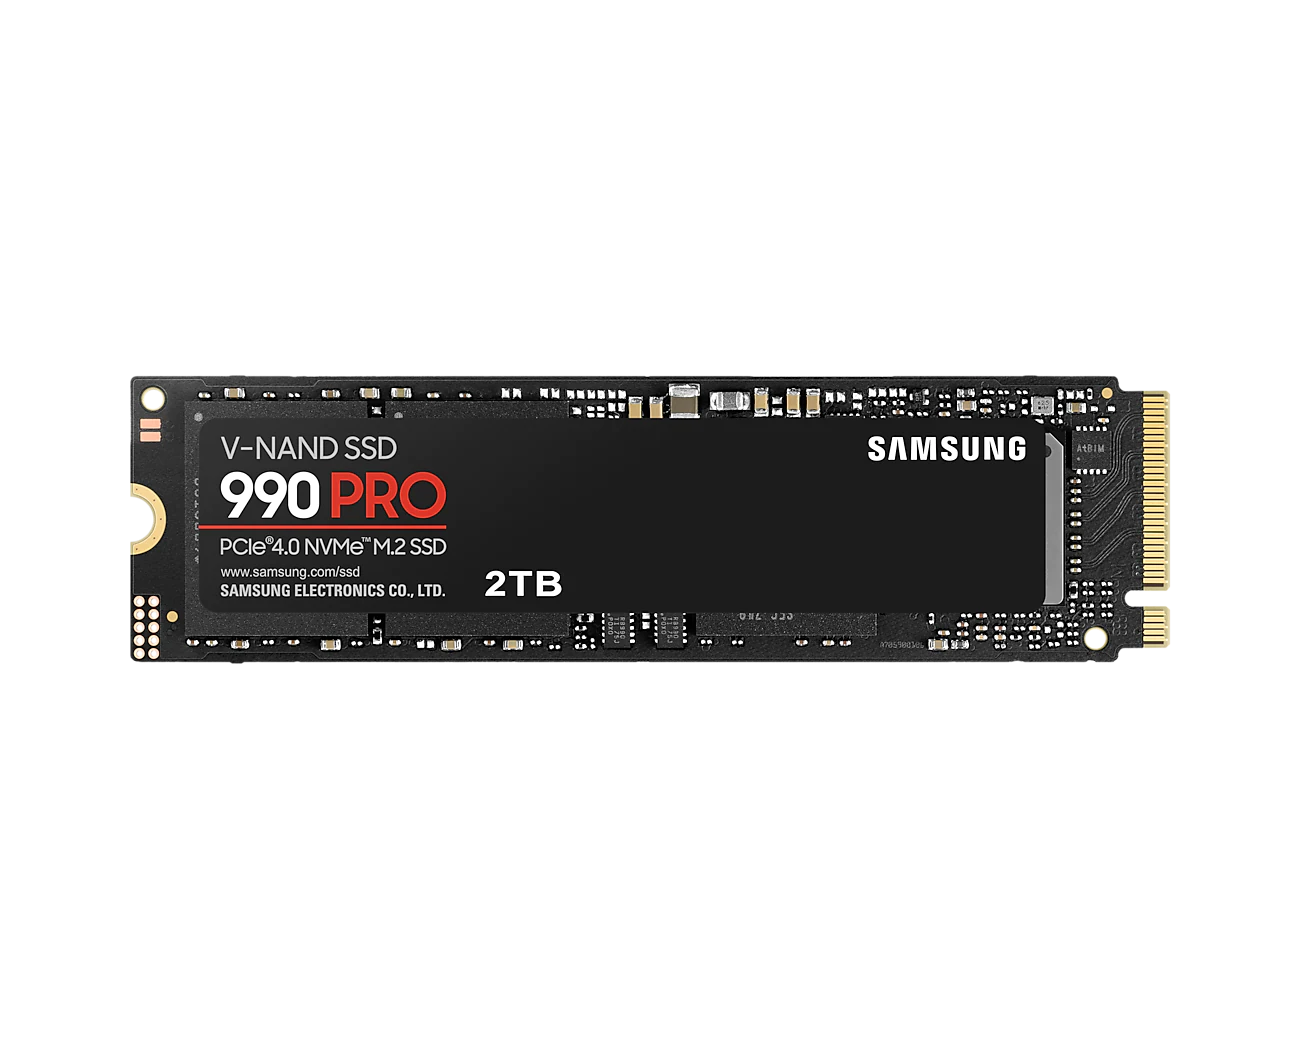 SAMSUNG 990 PRO NVMe M.2 2TB SOLID STATE DRIVE - MZ-V9P2T0BW